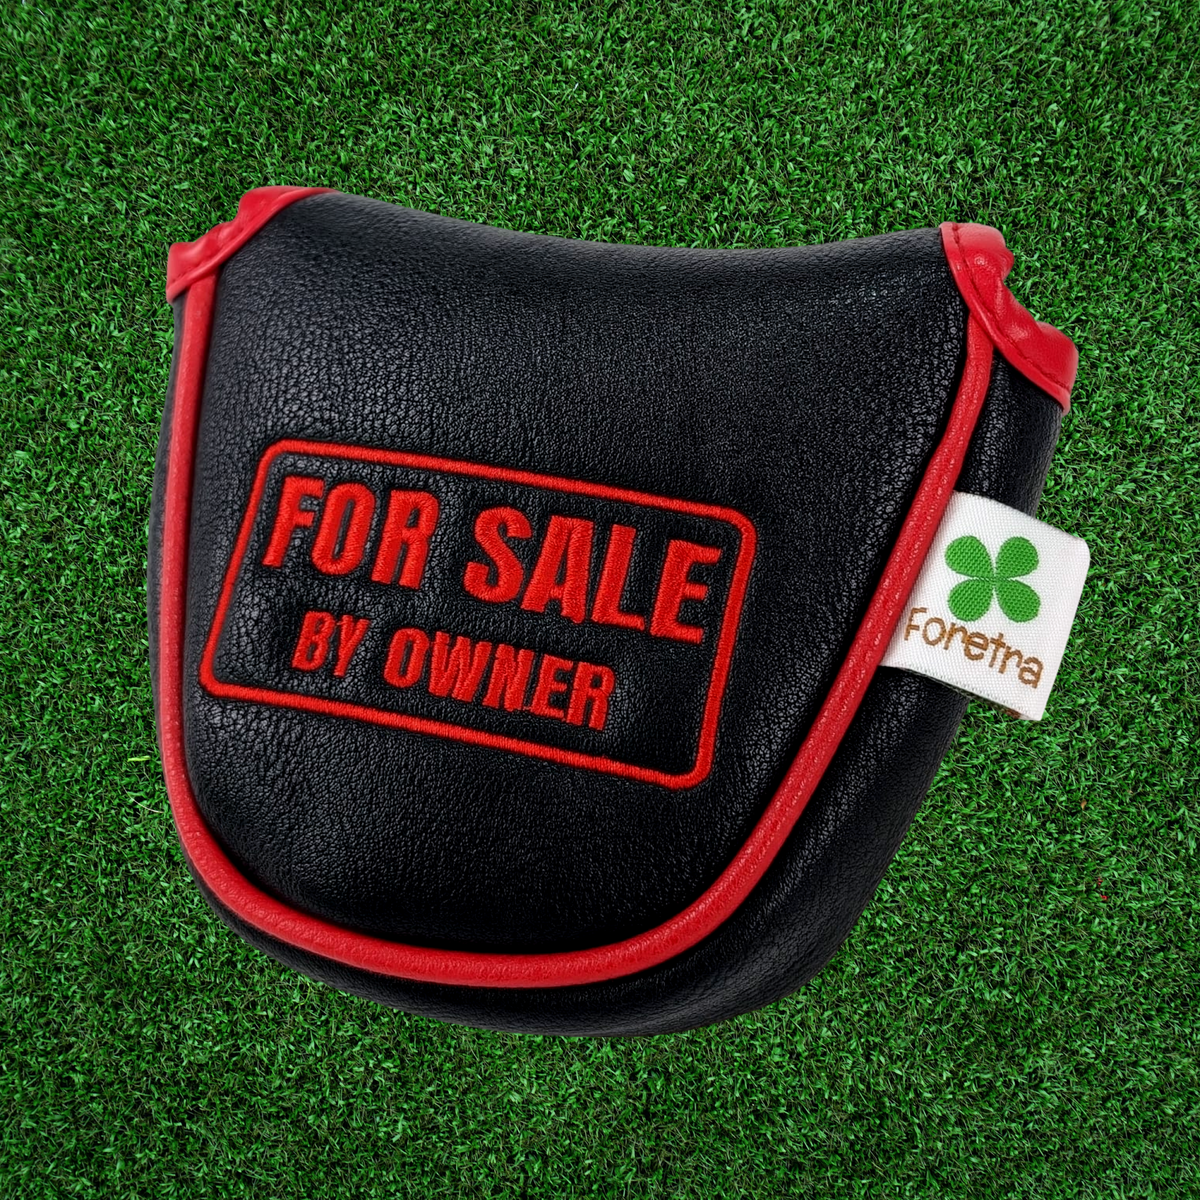 For Sale by Owner - MALLET Putter Headcover